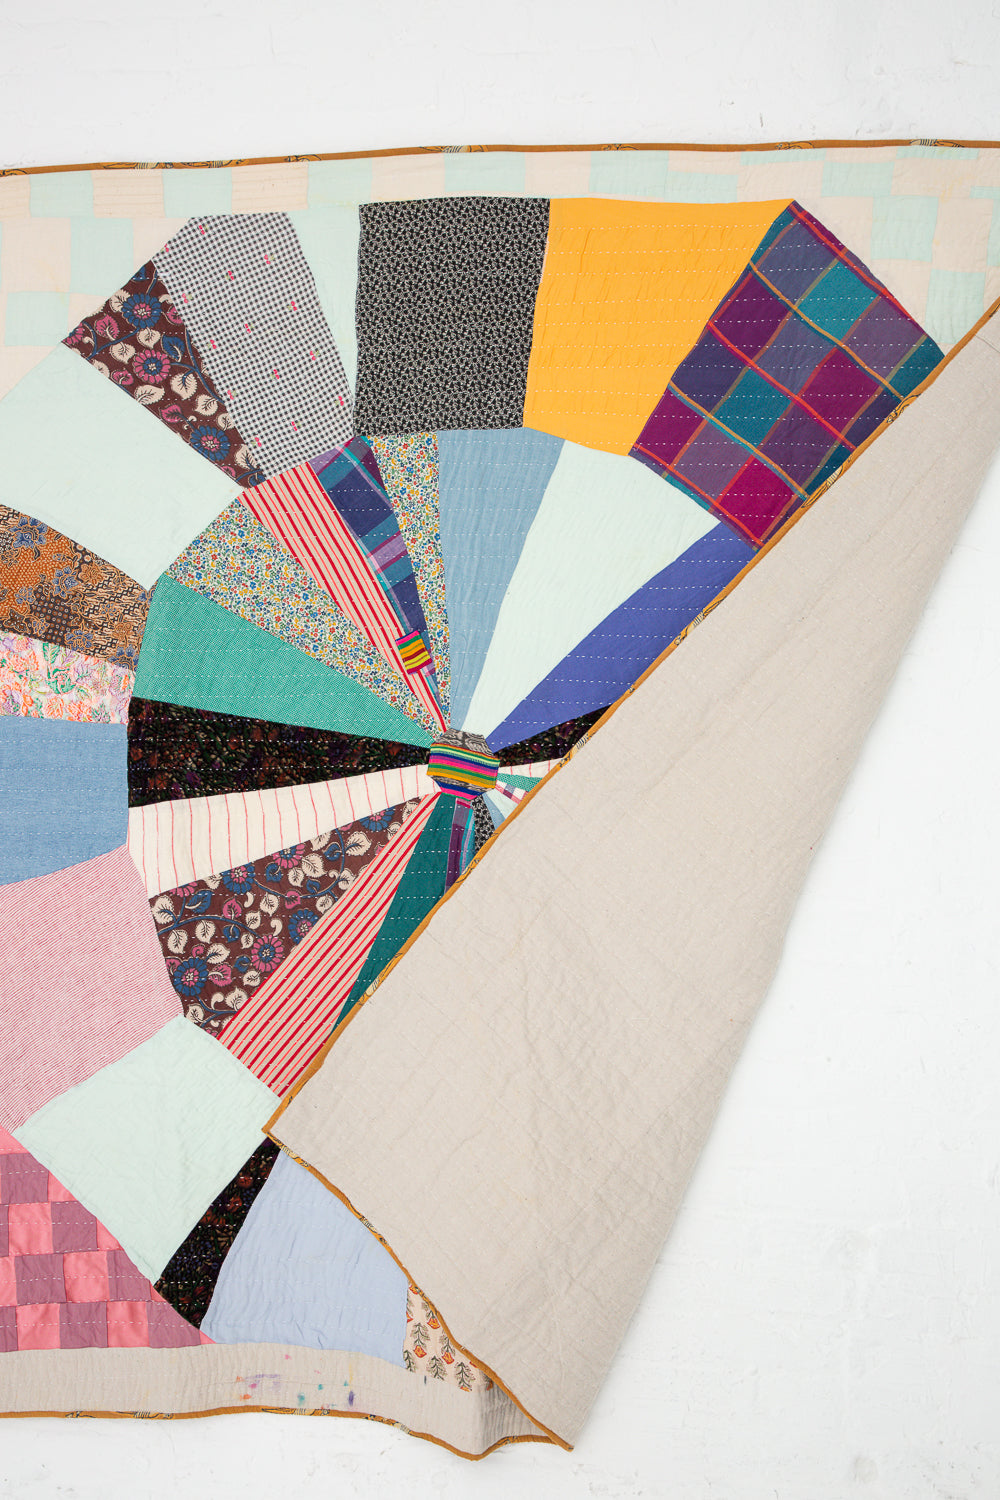 Counterpane - Patchwork Throw Quilt in Circle Pattern